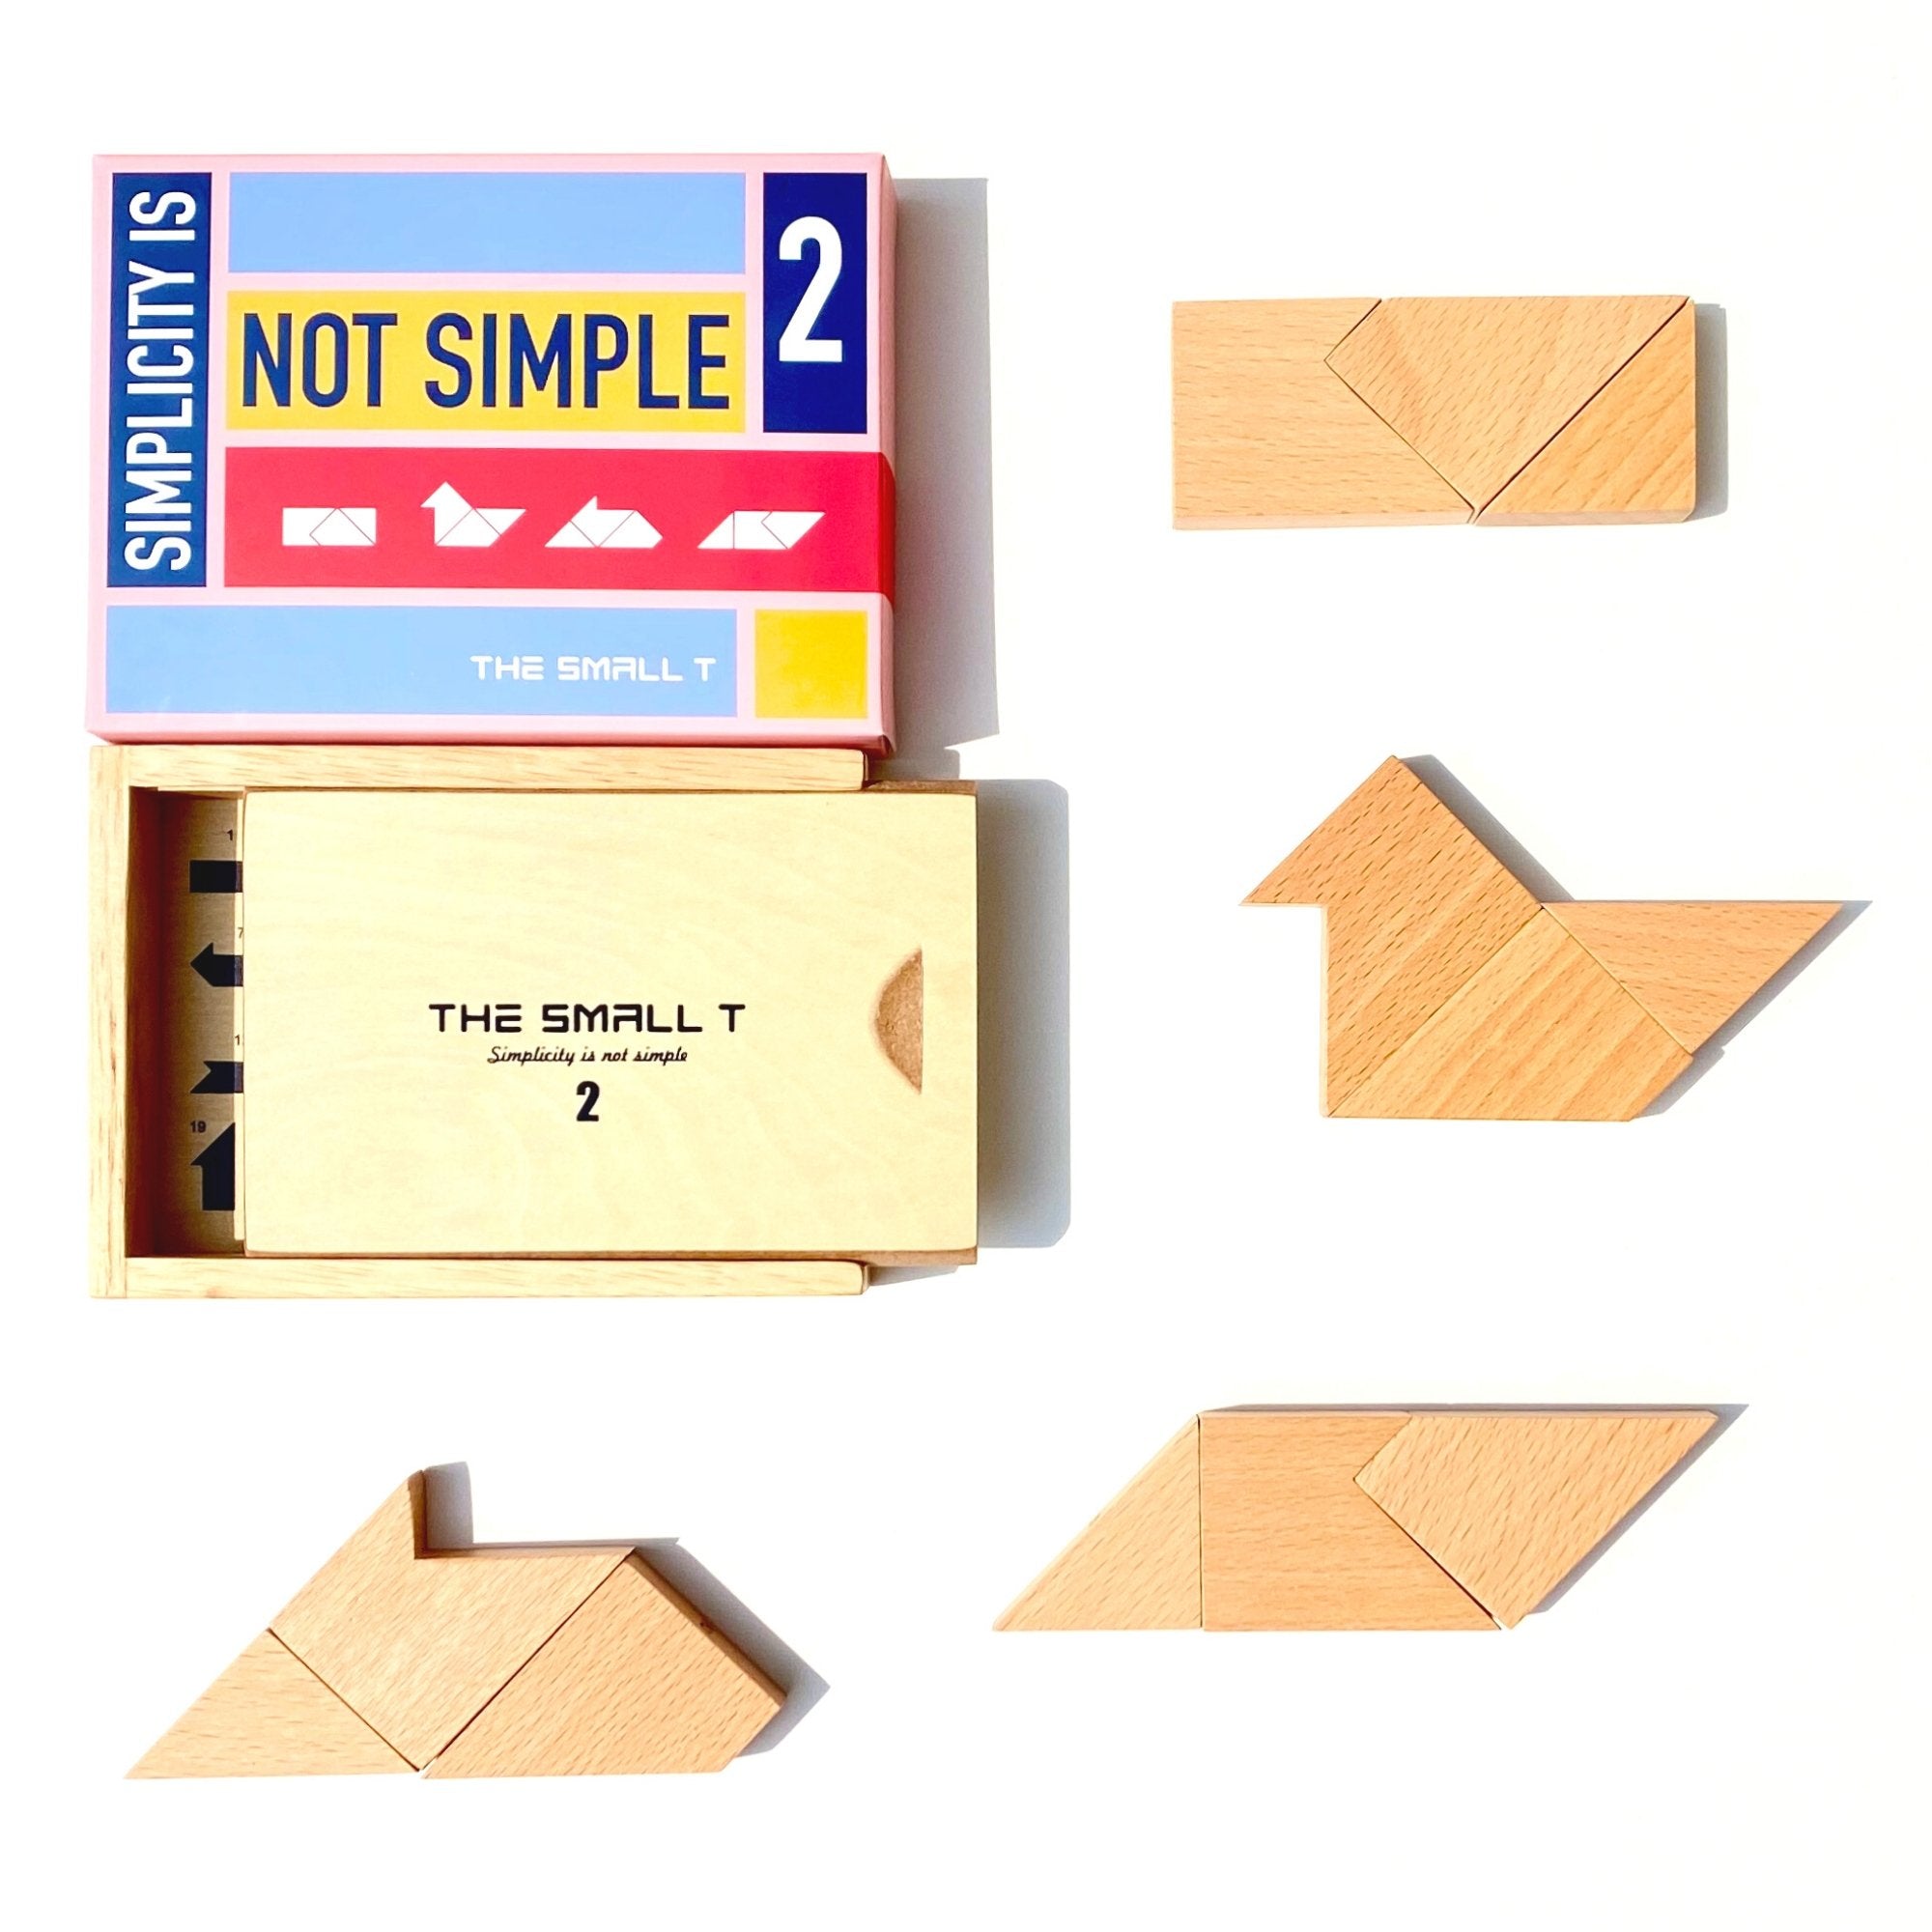 Brain Teaser Puzzle - The Small T2 (Difficulty level: 6/10)